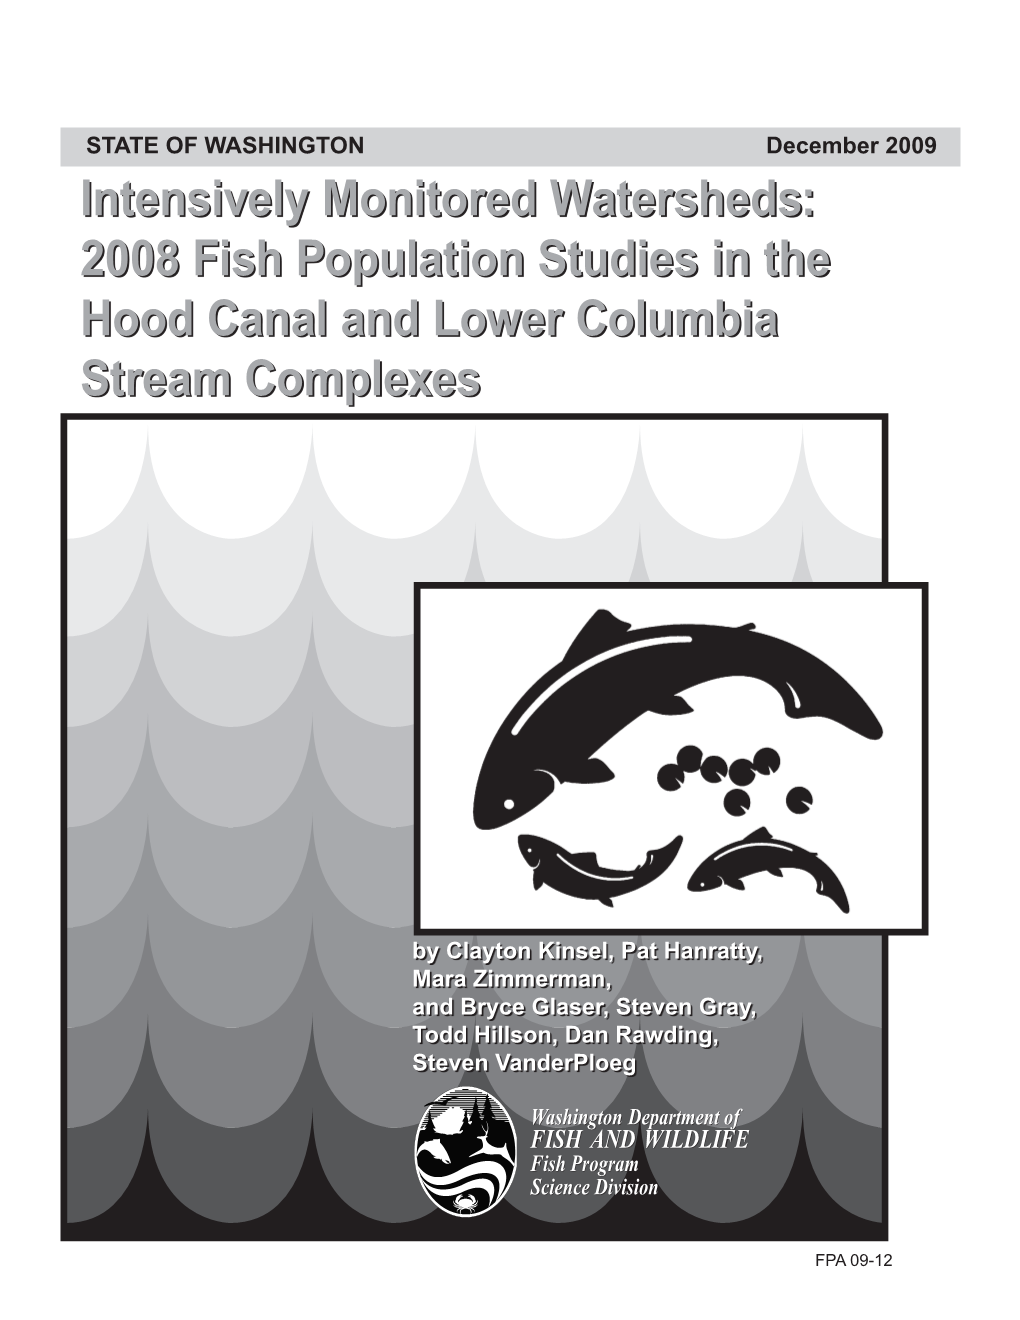 Intensively Monitored Watersheds: 2008 Fish Population Studies in the Hood Canal and Lower Columbia Stream Complexes